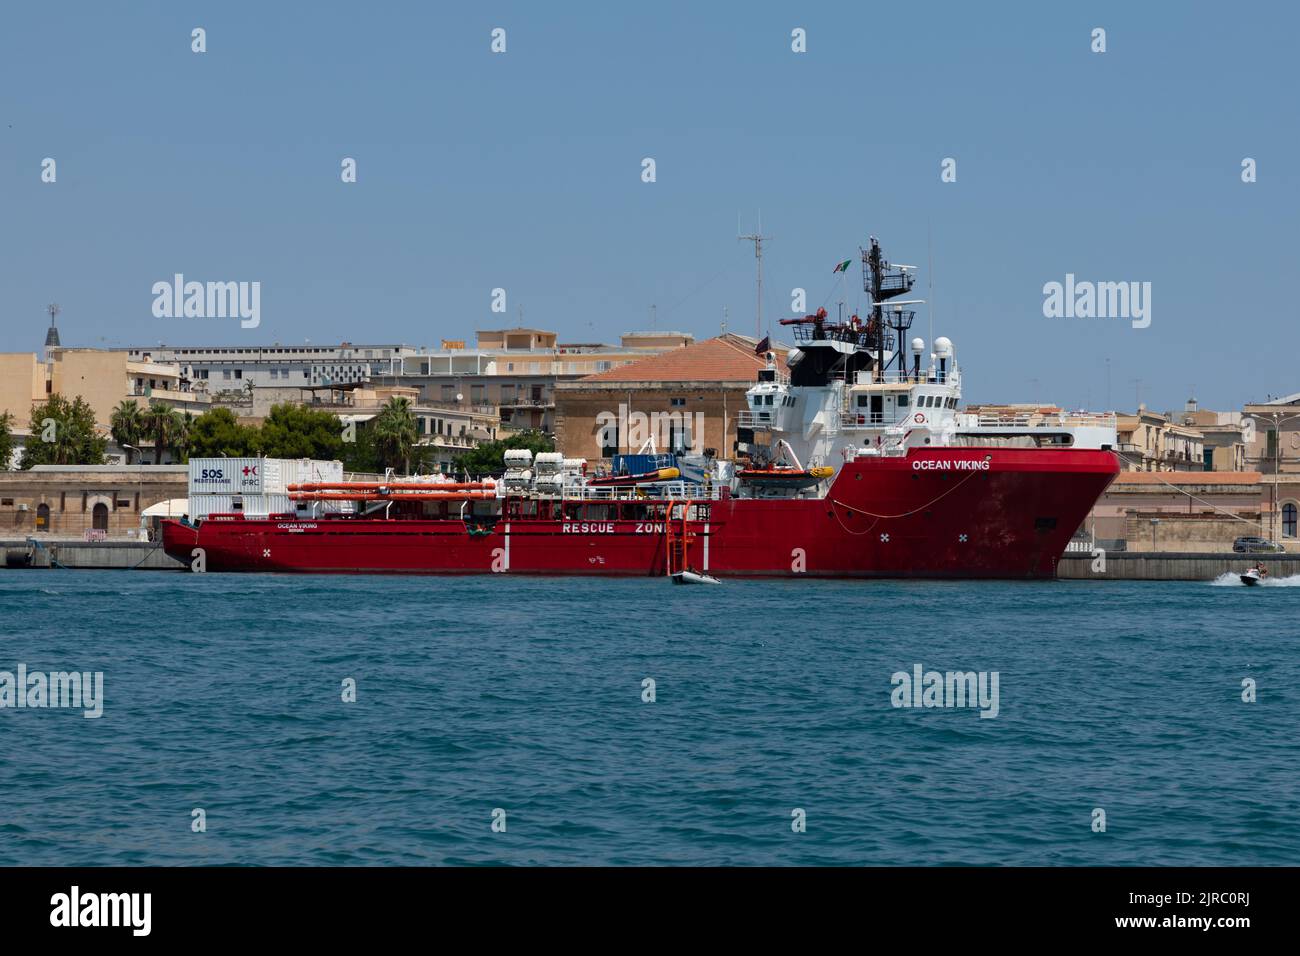 The Ocean Viking, chartered by SOS Mediterranee to conduct search and rescue activities in the central Mediterranean. Stock Photo